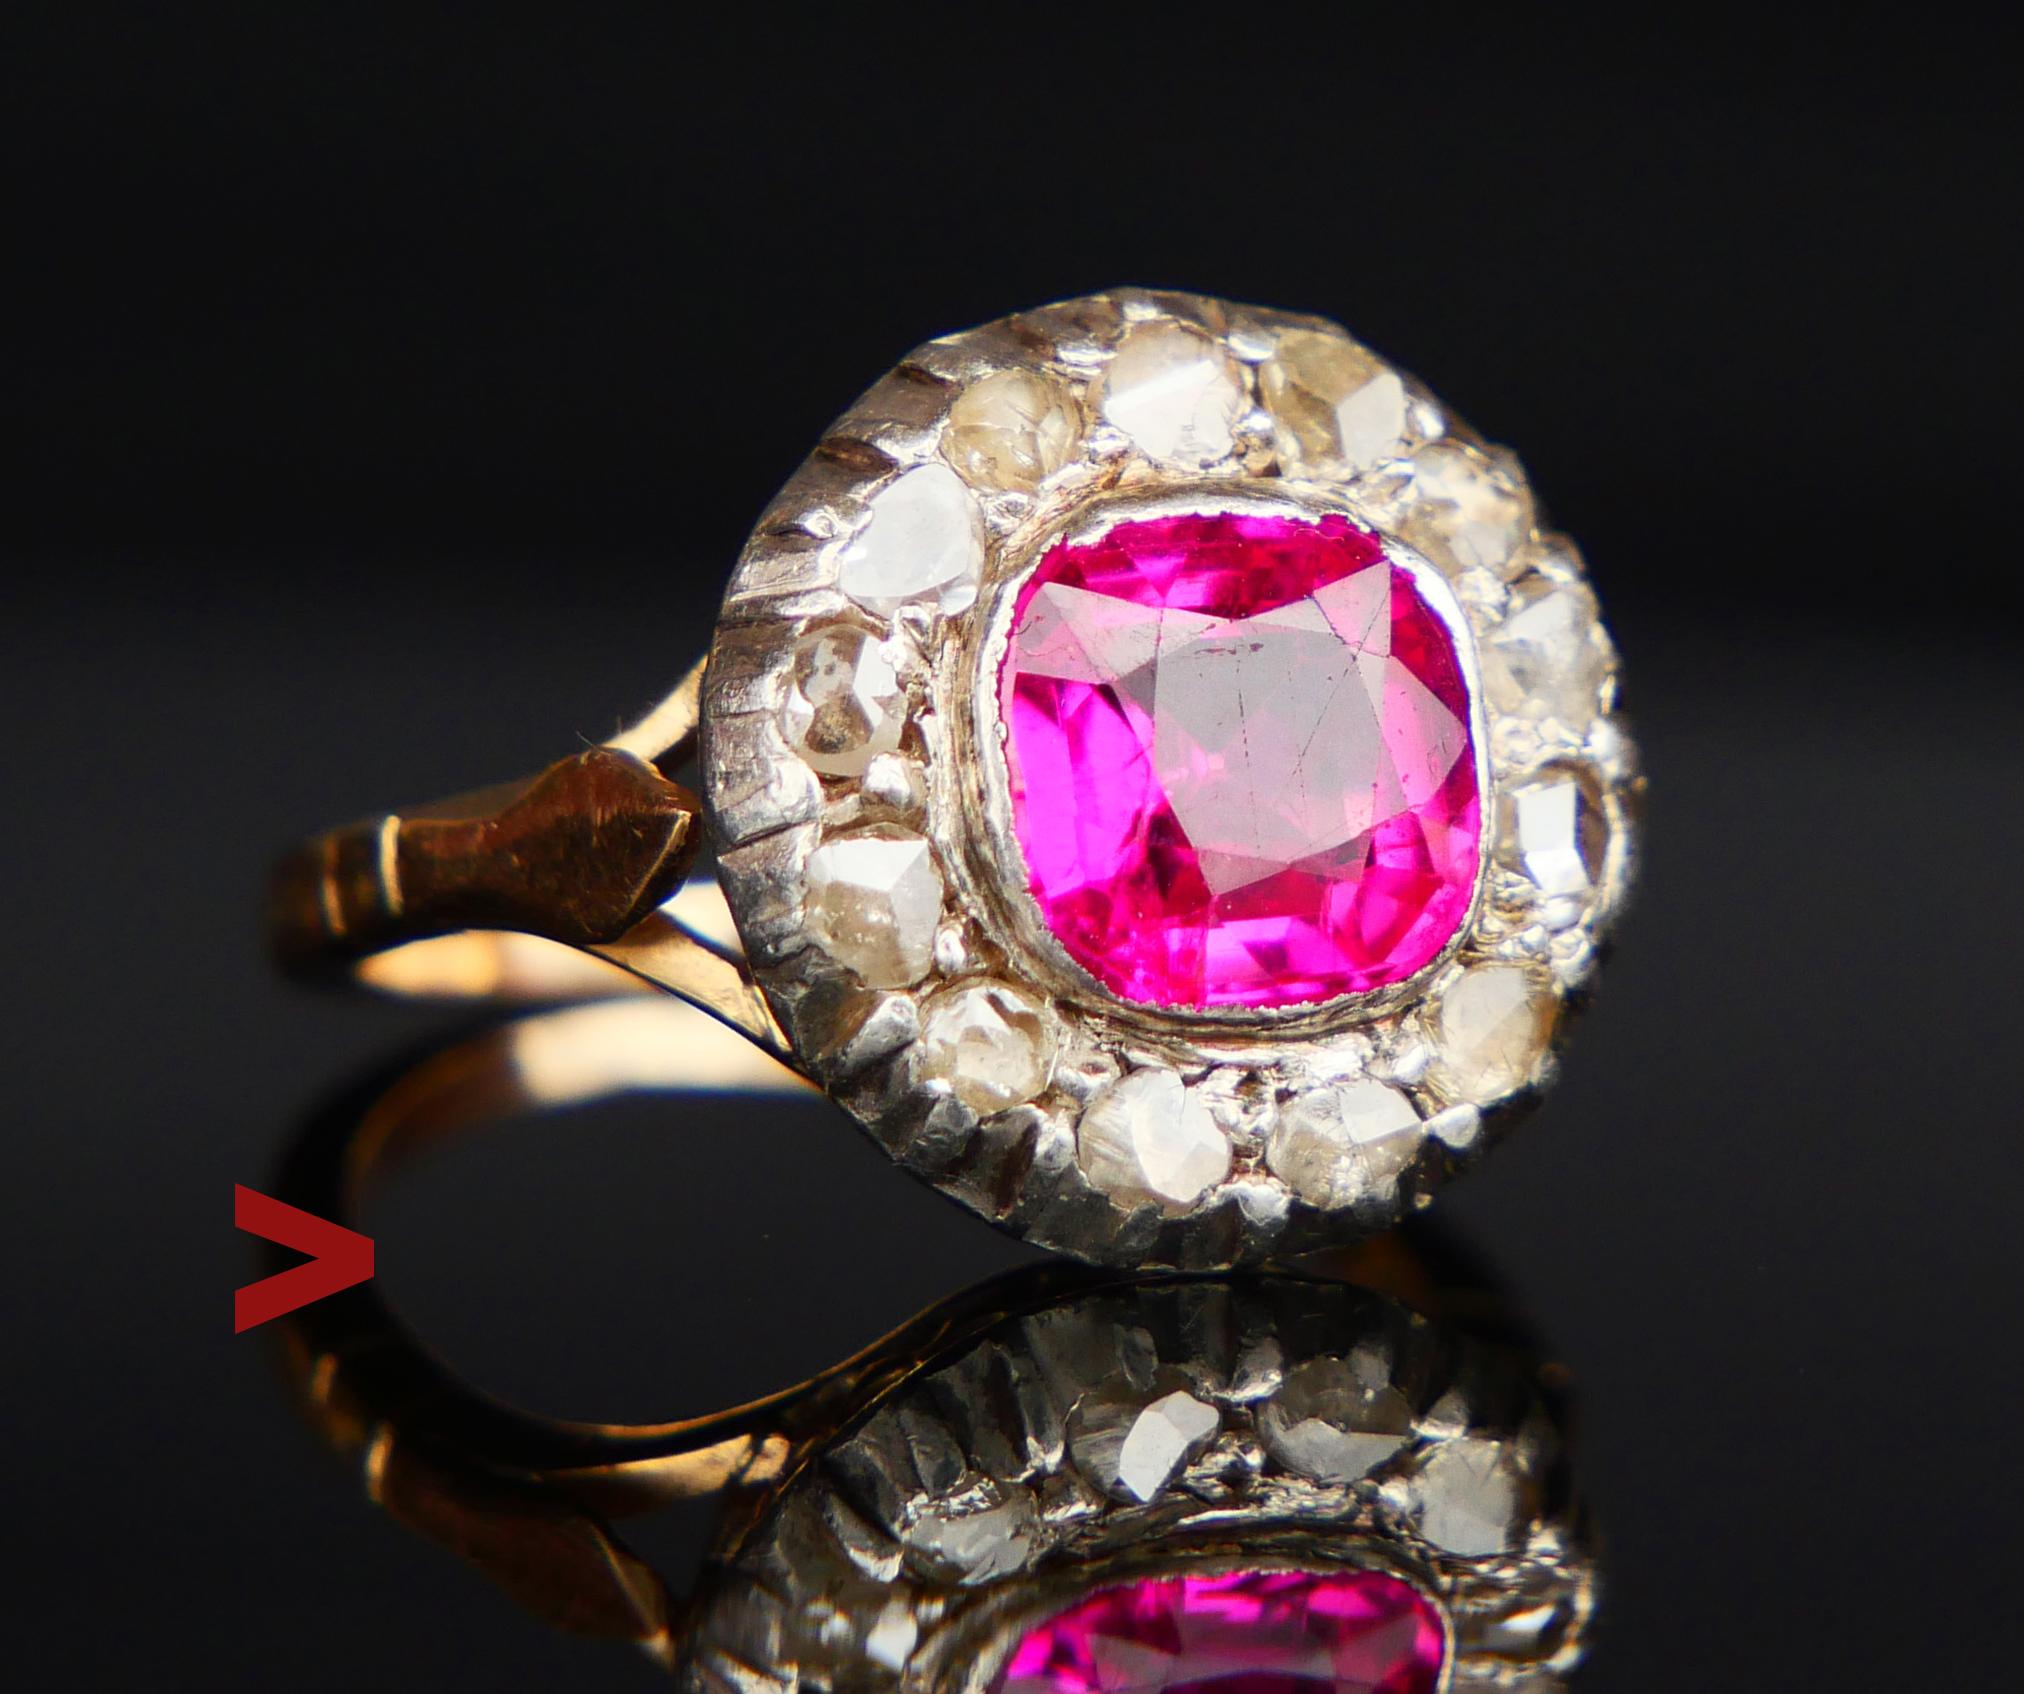 Halo Ring from ca .1920s -1930s with Ruby and 13 rose cut Diamonds. Not hallmarked, tested 18K.

Crown with Silver /or White Gold top on solid 18K Yellow Gold measures Ø 14 mm x 6 mm deep .. Bezel set Ruby's likely lab-made, old cushion cut 7 mm x